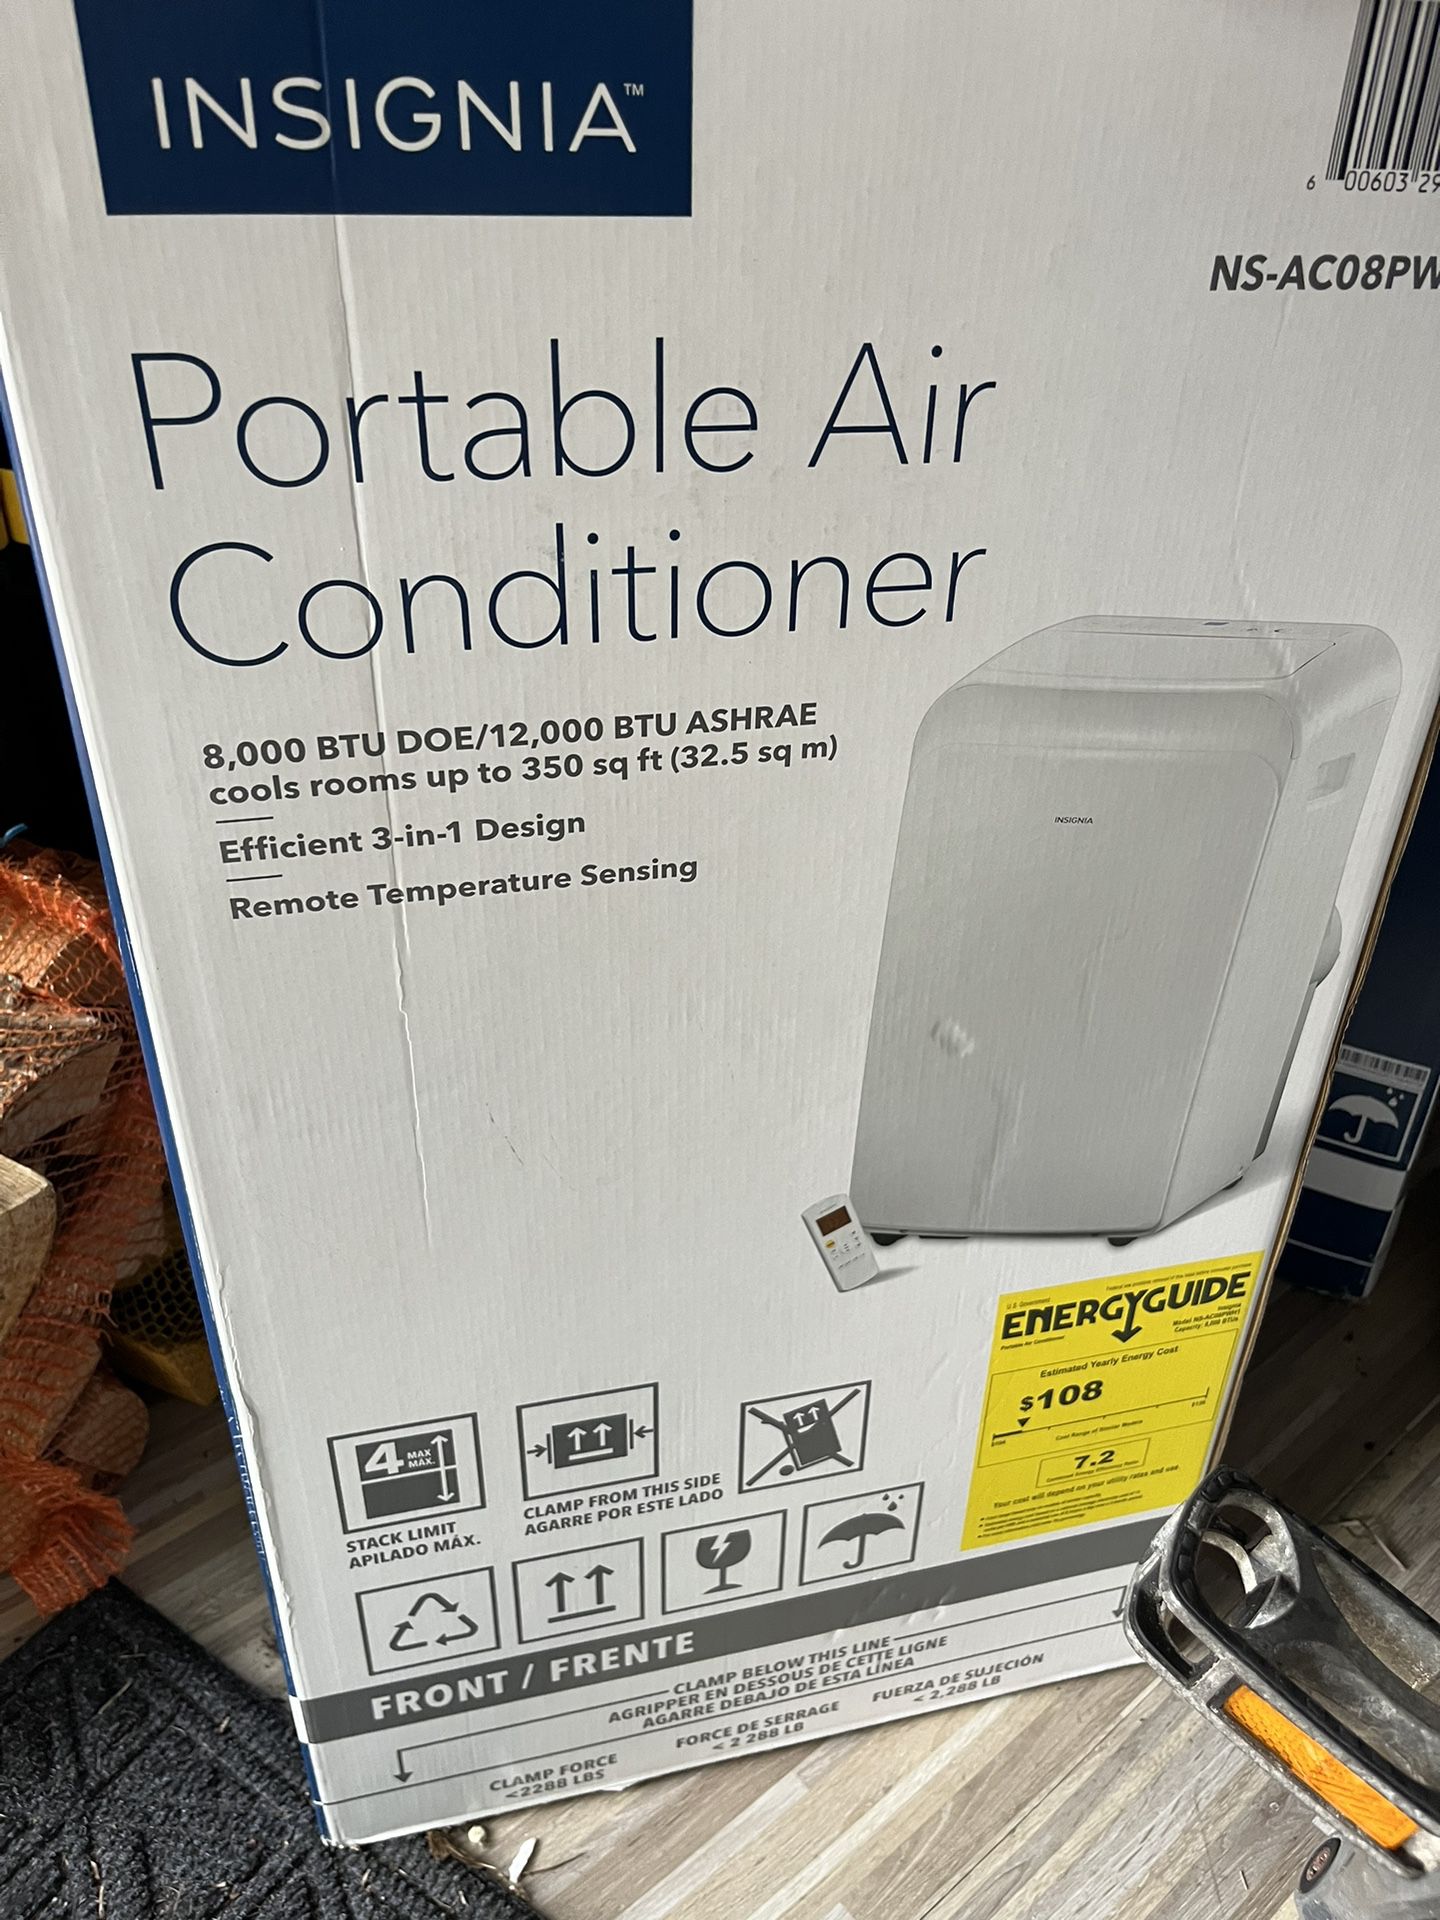 New Portable Air Conditioner 